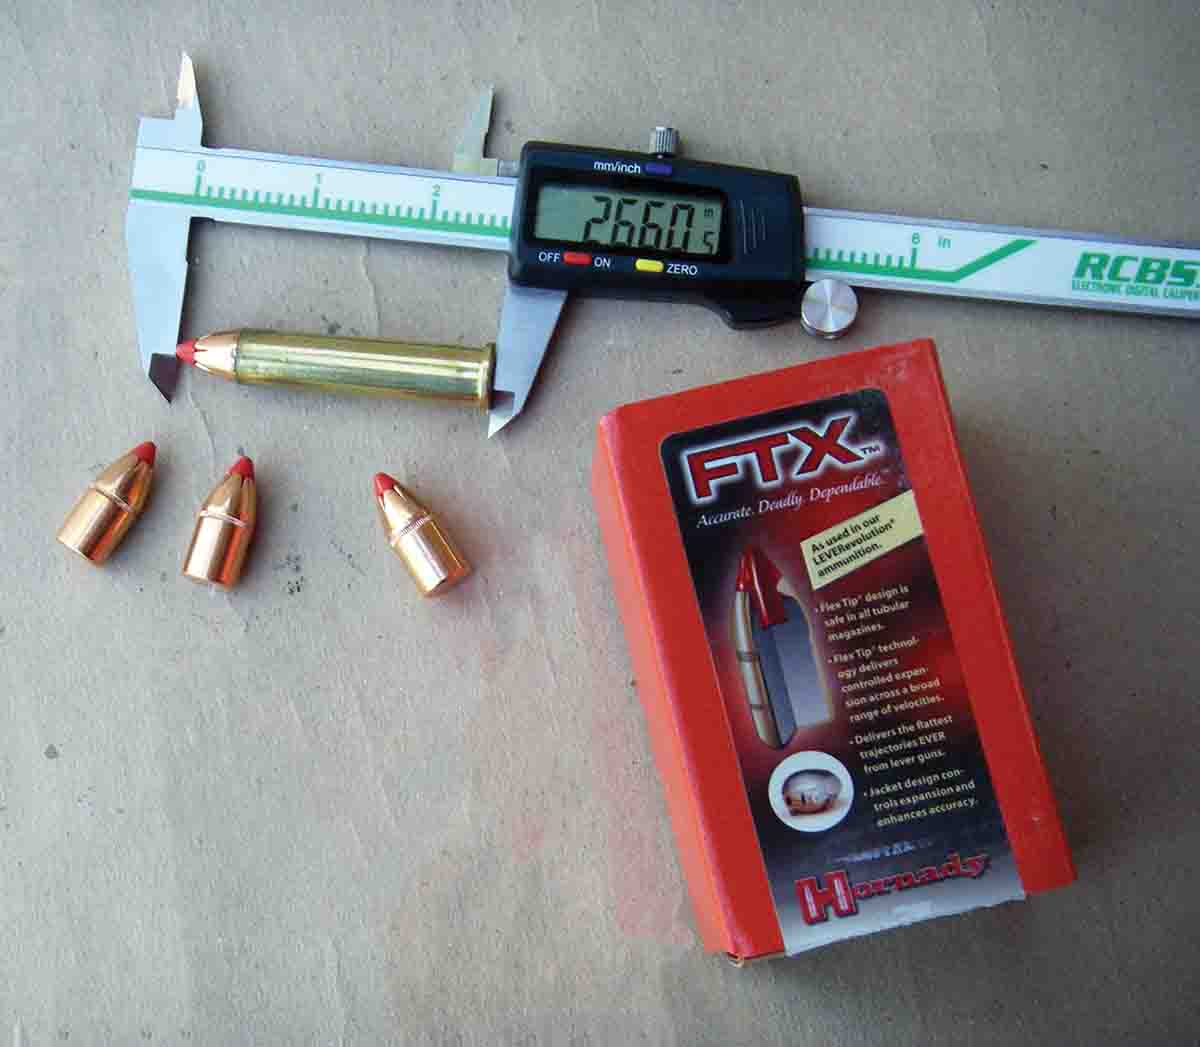 When handloading for lever-action rifles chambered for the .45-70, cases will generally need to be trimmed to 2.040 inches to accommodate the longer nose length of the Hornady 325-grain FTX bullet. However, some rifles might allow cases to be left full length, which results in an overall cartridge length of around 2.660 inches.